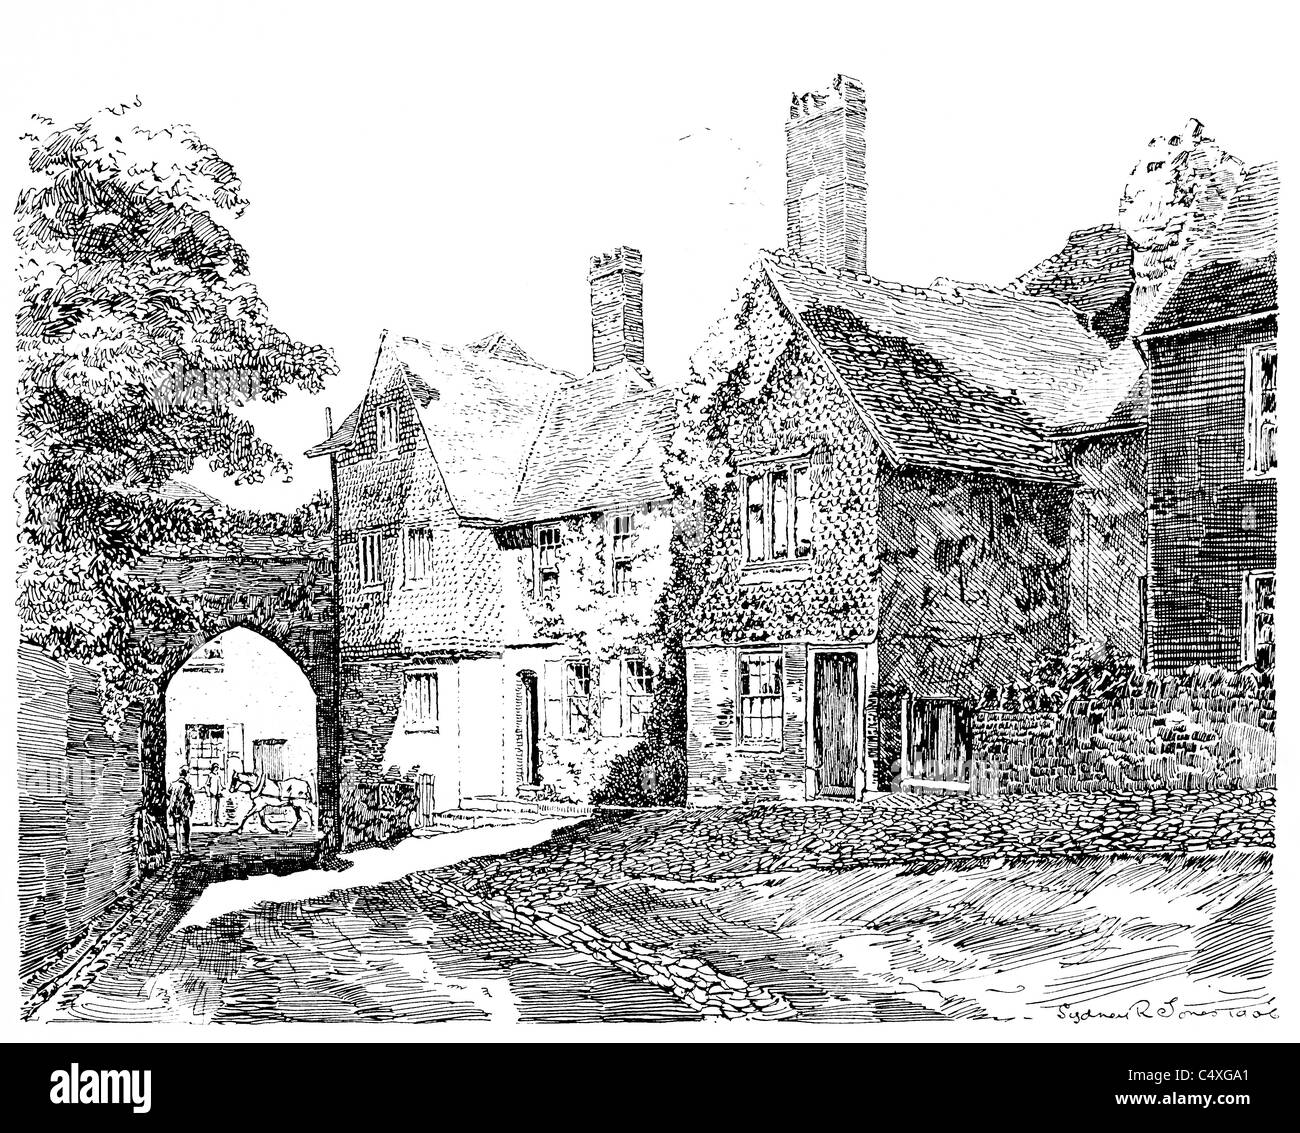 Guildford Castle, Surrey - pen and ink illustration from 'Old English Country Cottages' by Charles Holme, 1906. Stock Photo